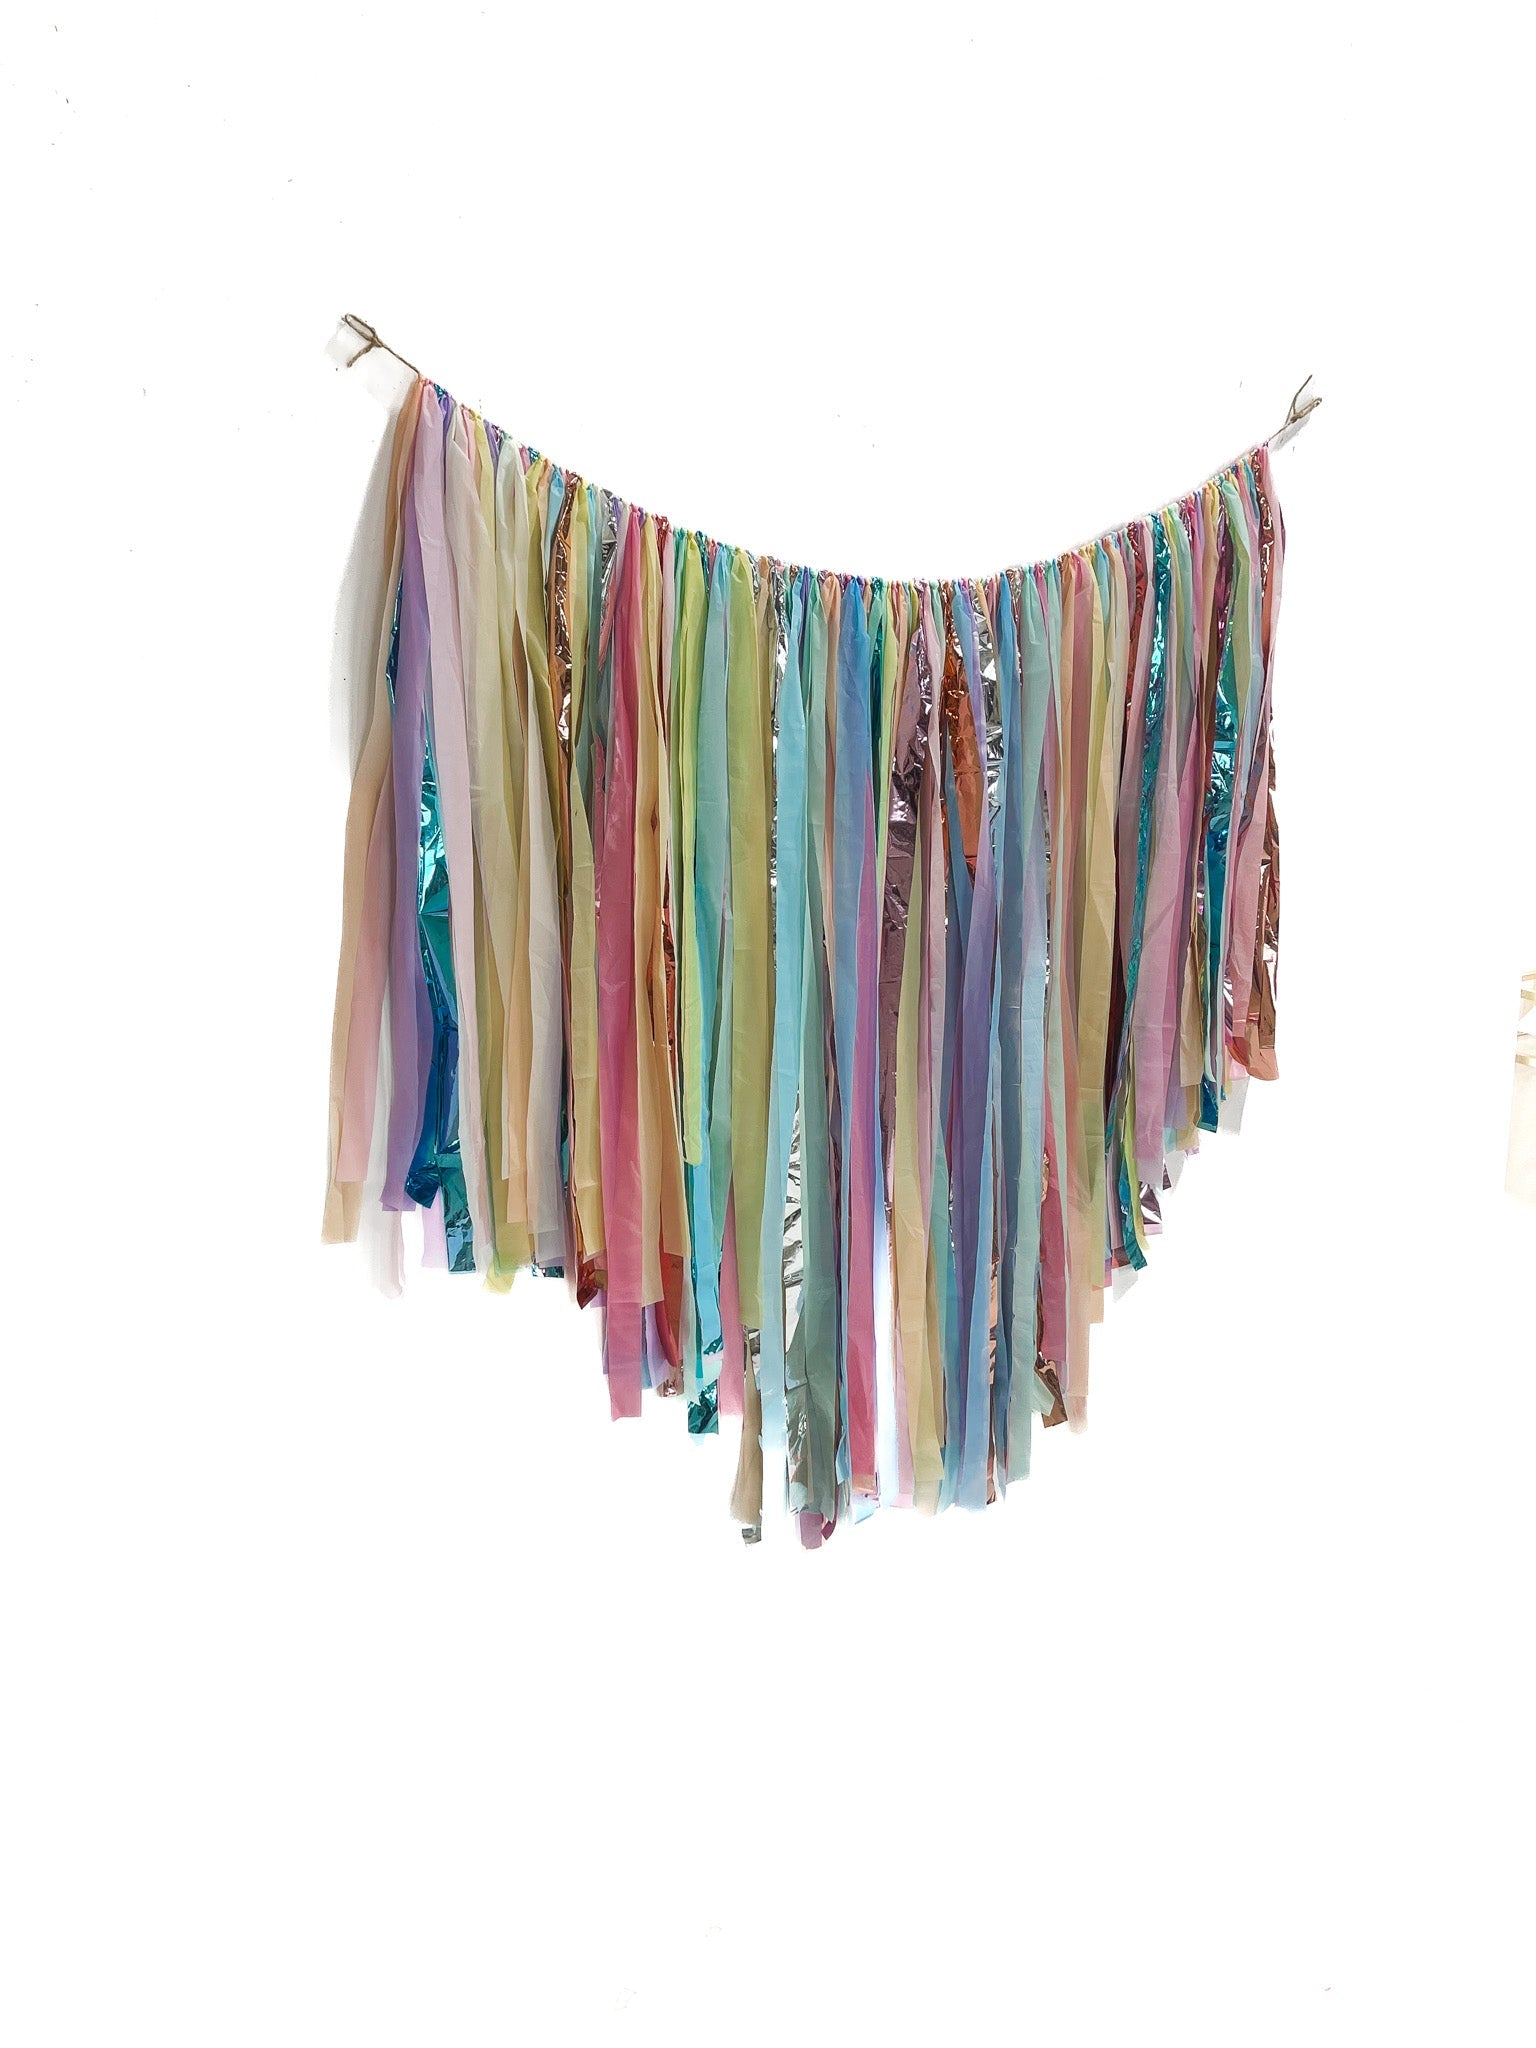 Candy Heart Fringe Backdrop - Oh My Darling Party Co-BLUE BACKDROPBLUE BACKDROPSblush #Fringe_Backdrop#